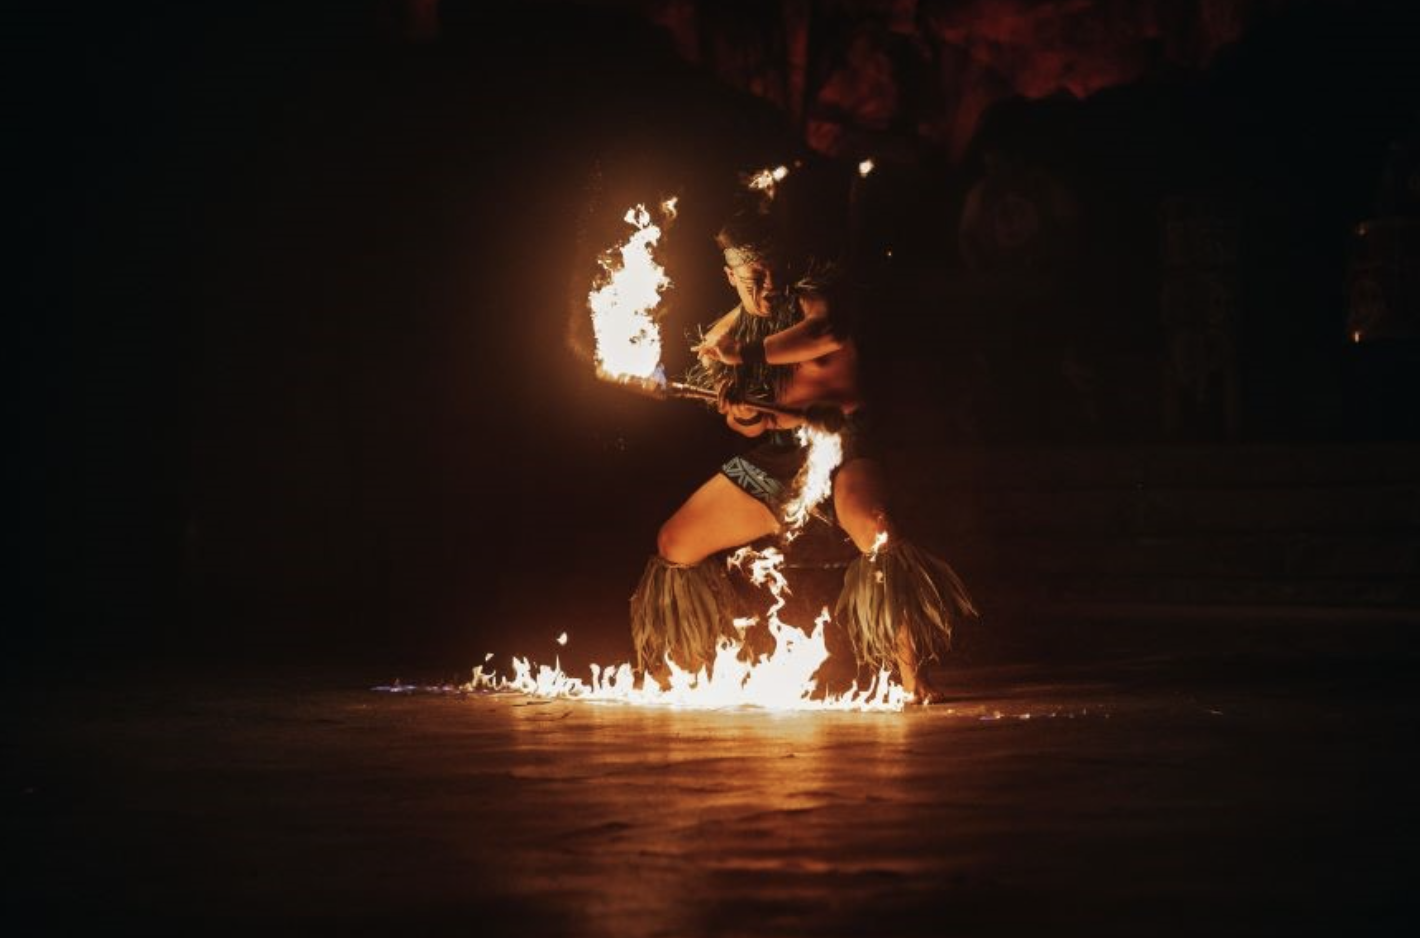 Mose Lilo performing his fireknife routine and spins the knife so fast he lights the floor on fire